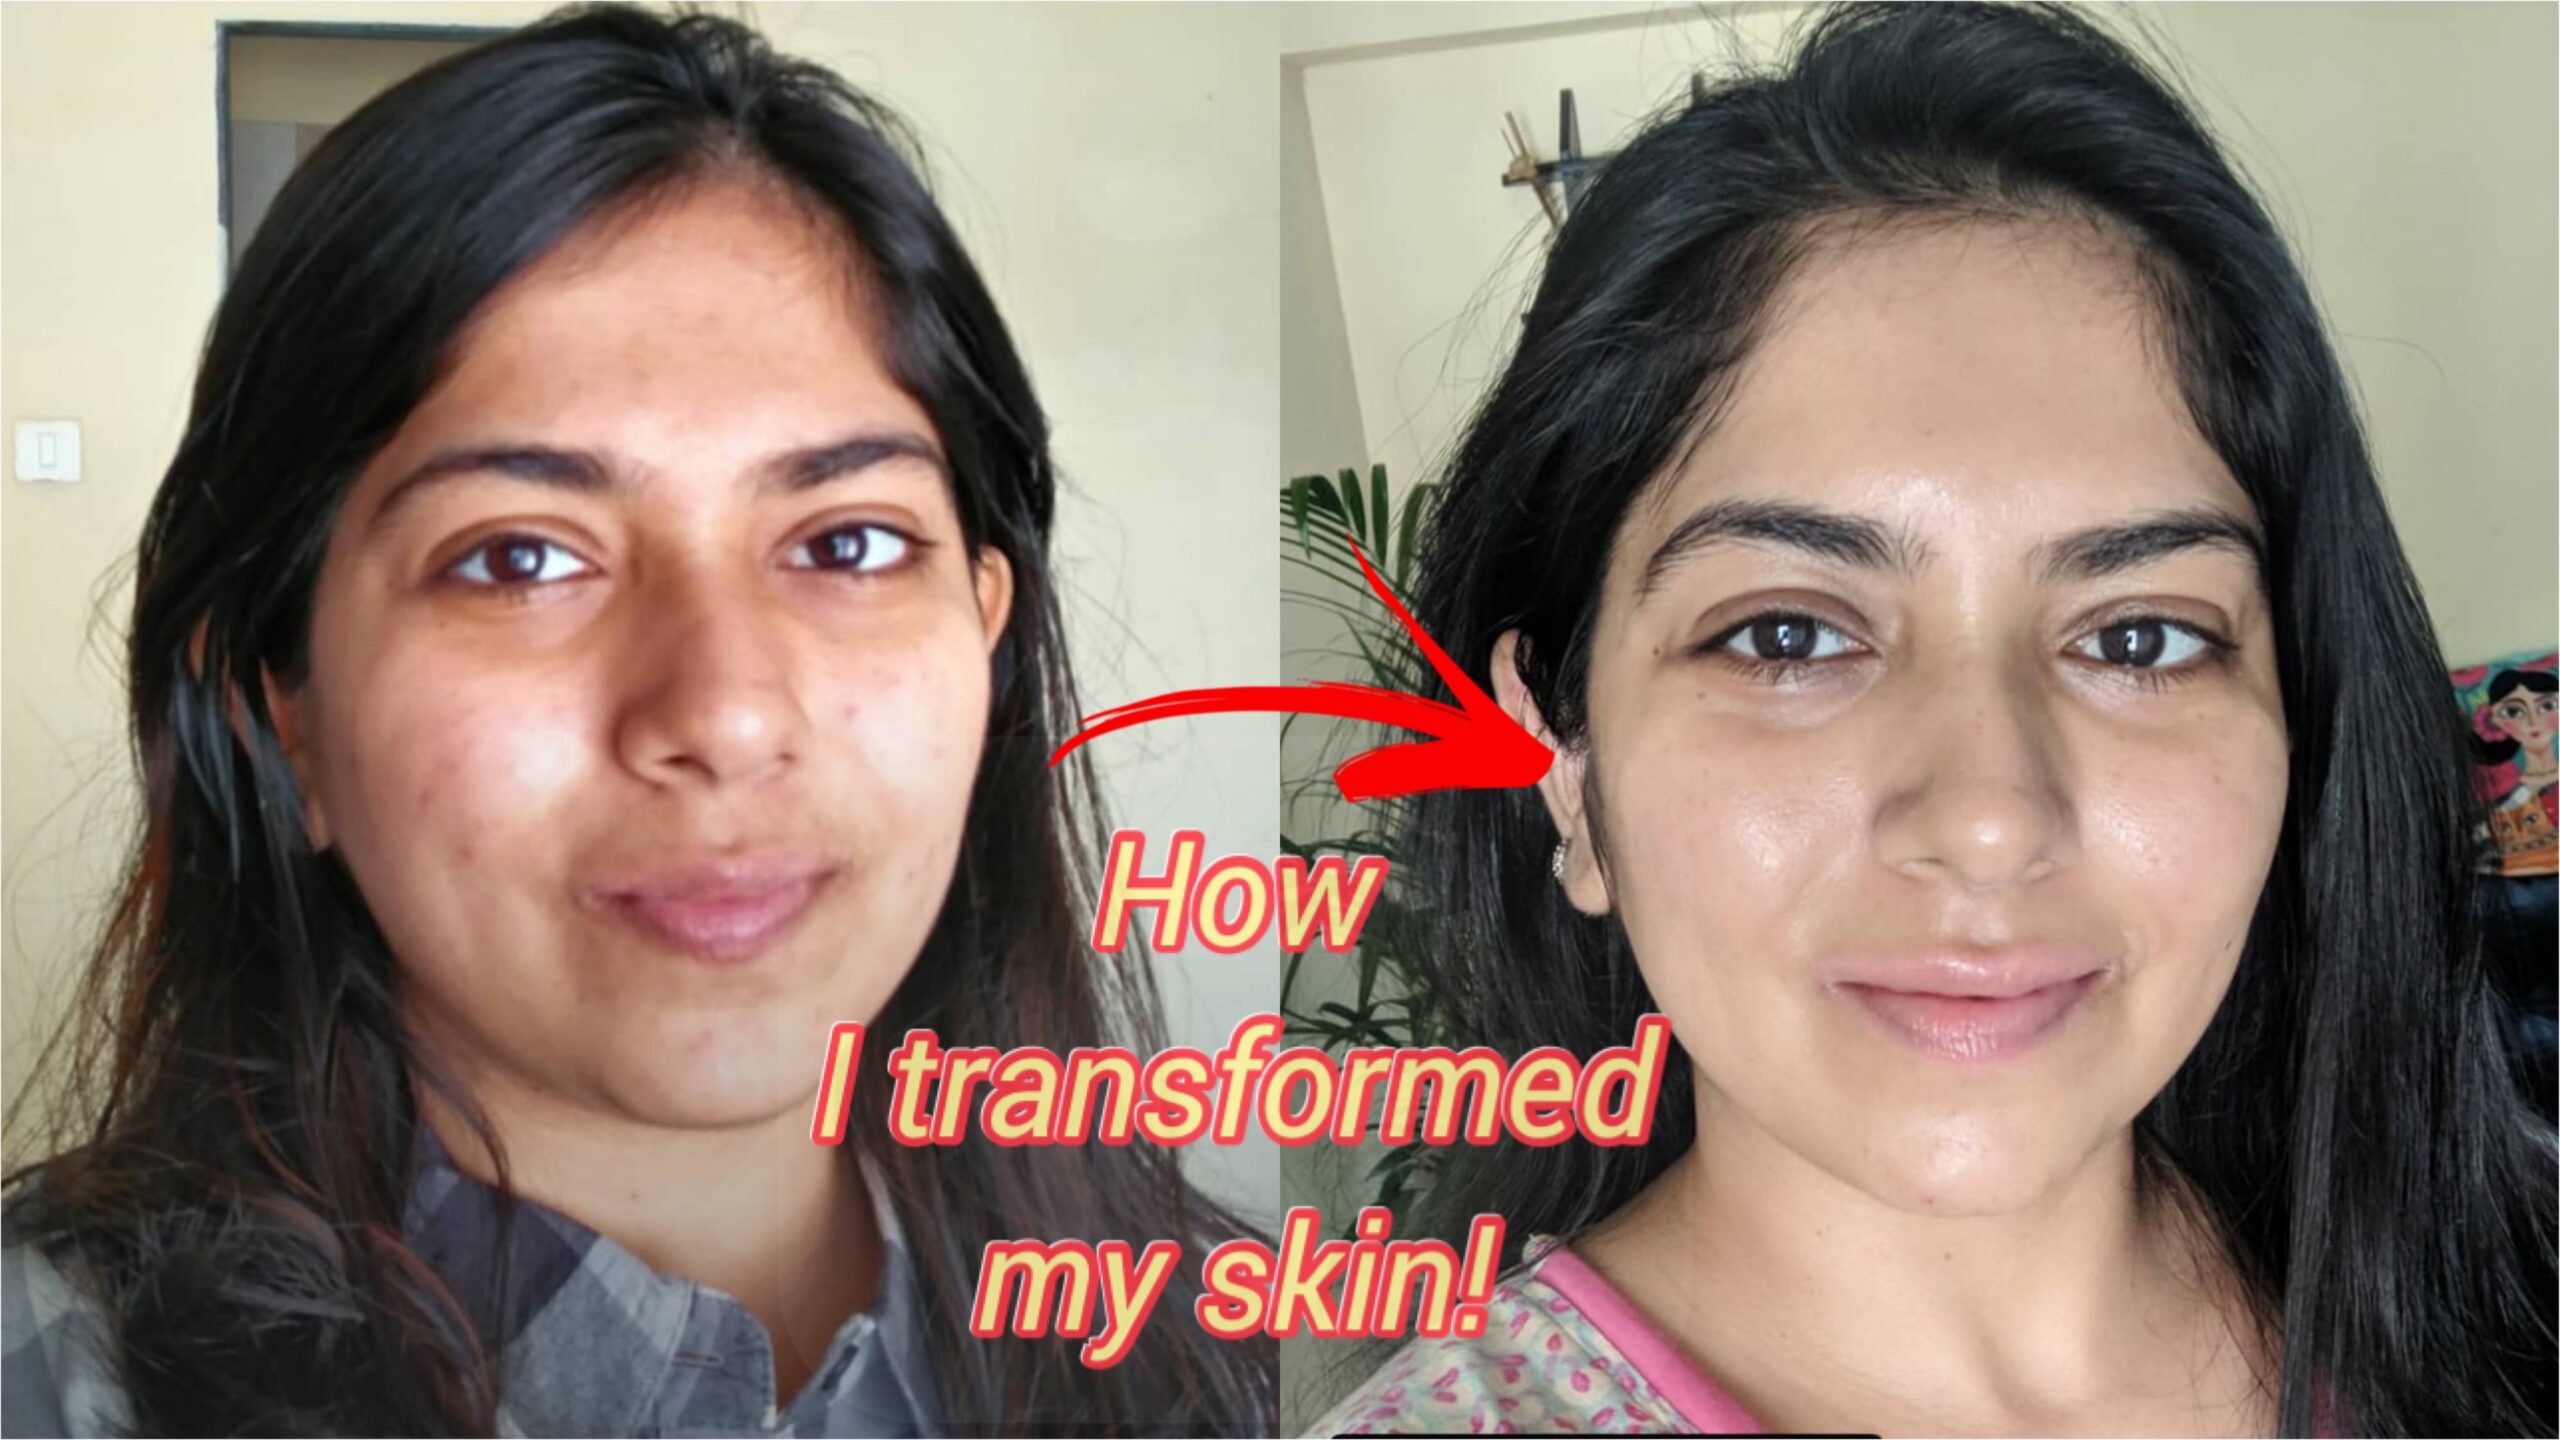 Diet & Lifestyle Changes For Better Skin Health - New Love - Makeup